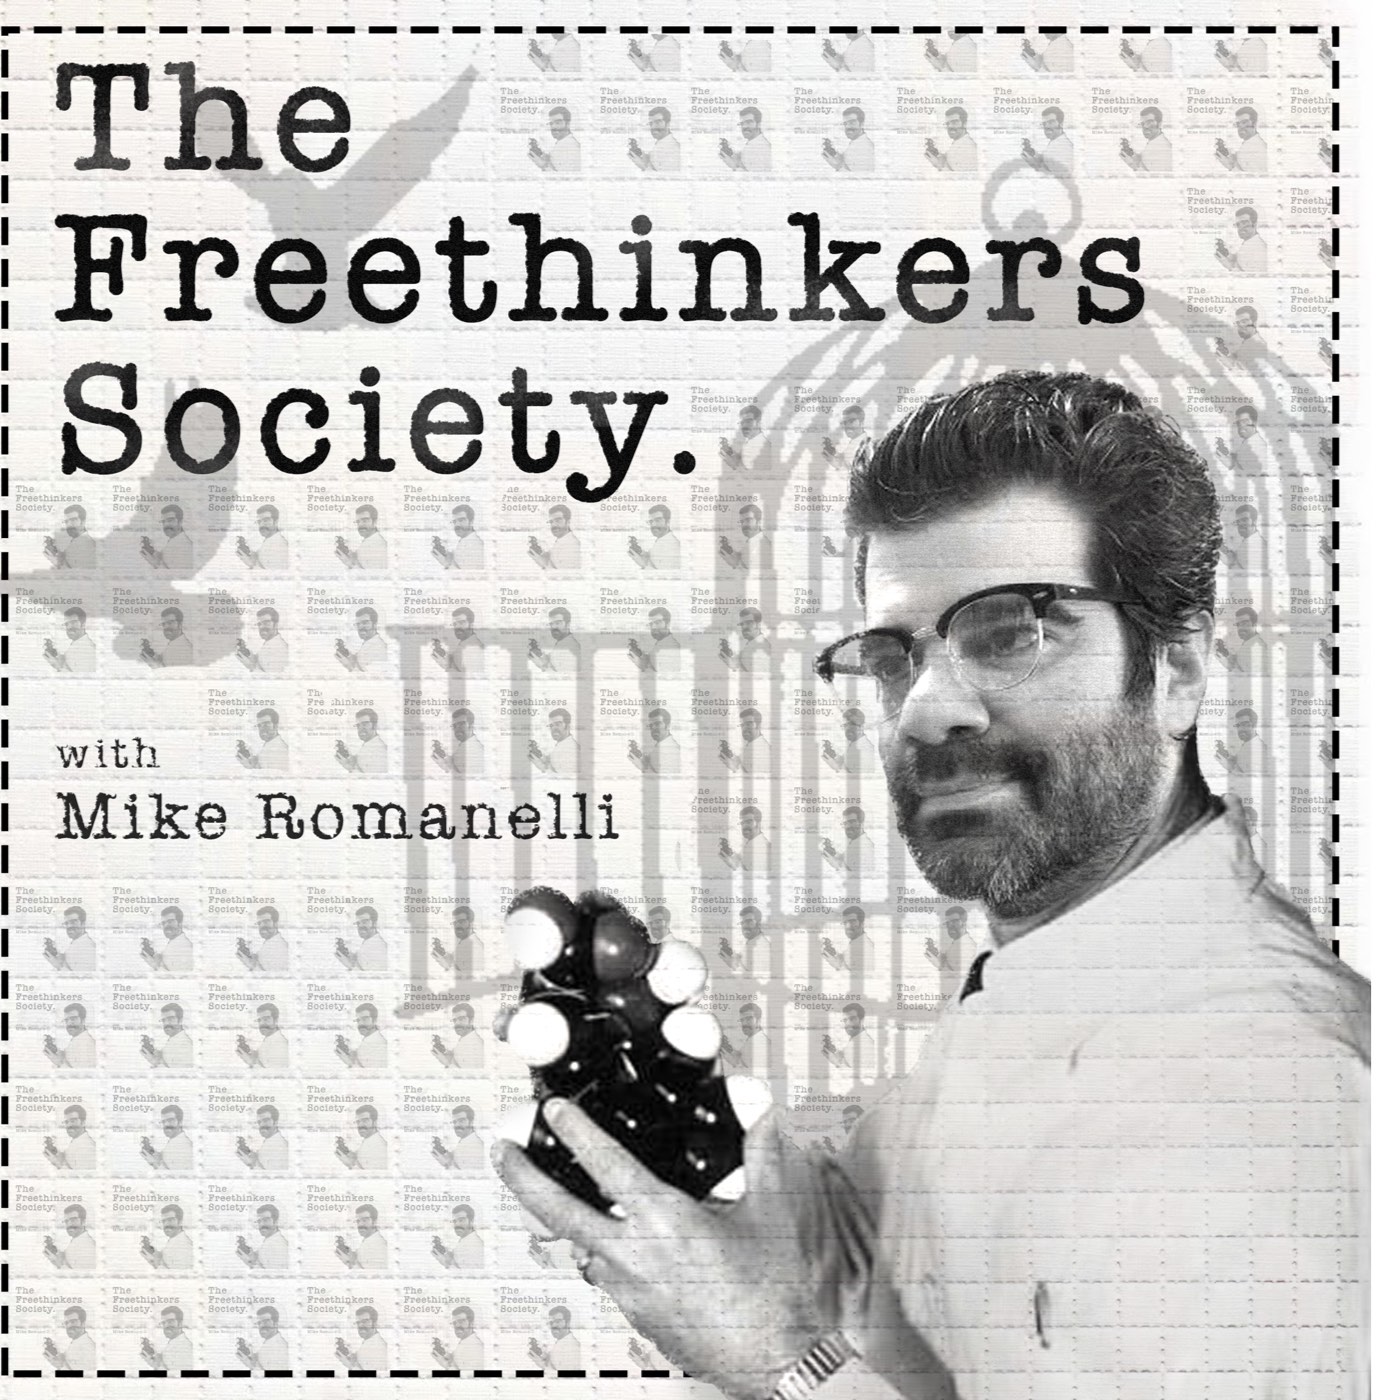 Show artwork for The Free Thinkers Society with Mike Romanelli